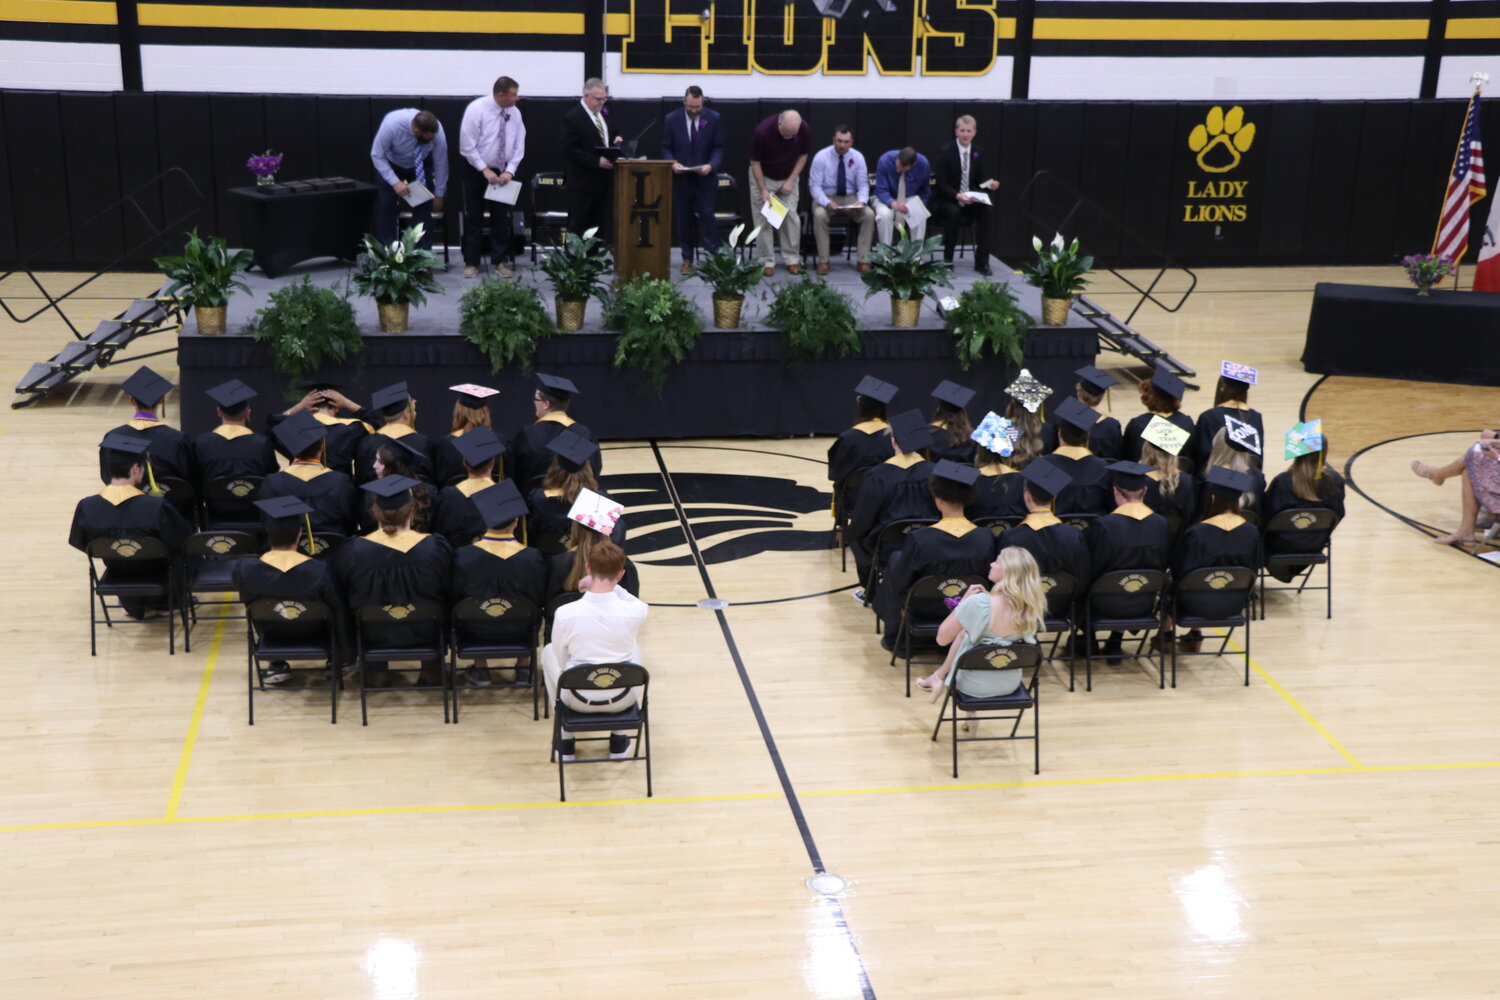 The Lone Tree class of 2023 settles into their seats after entering the gymnasium for their graduation ceremony.